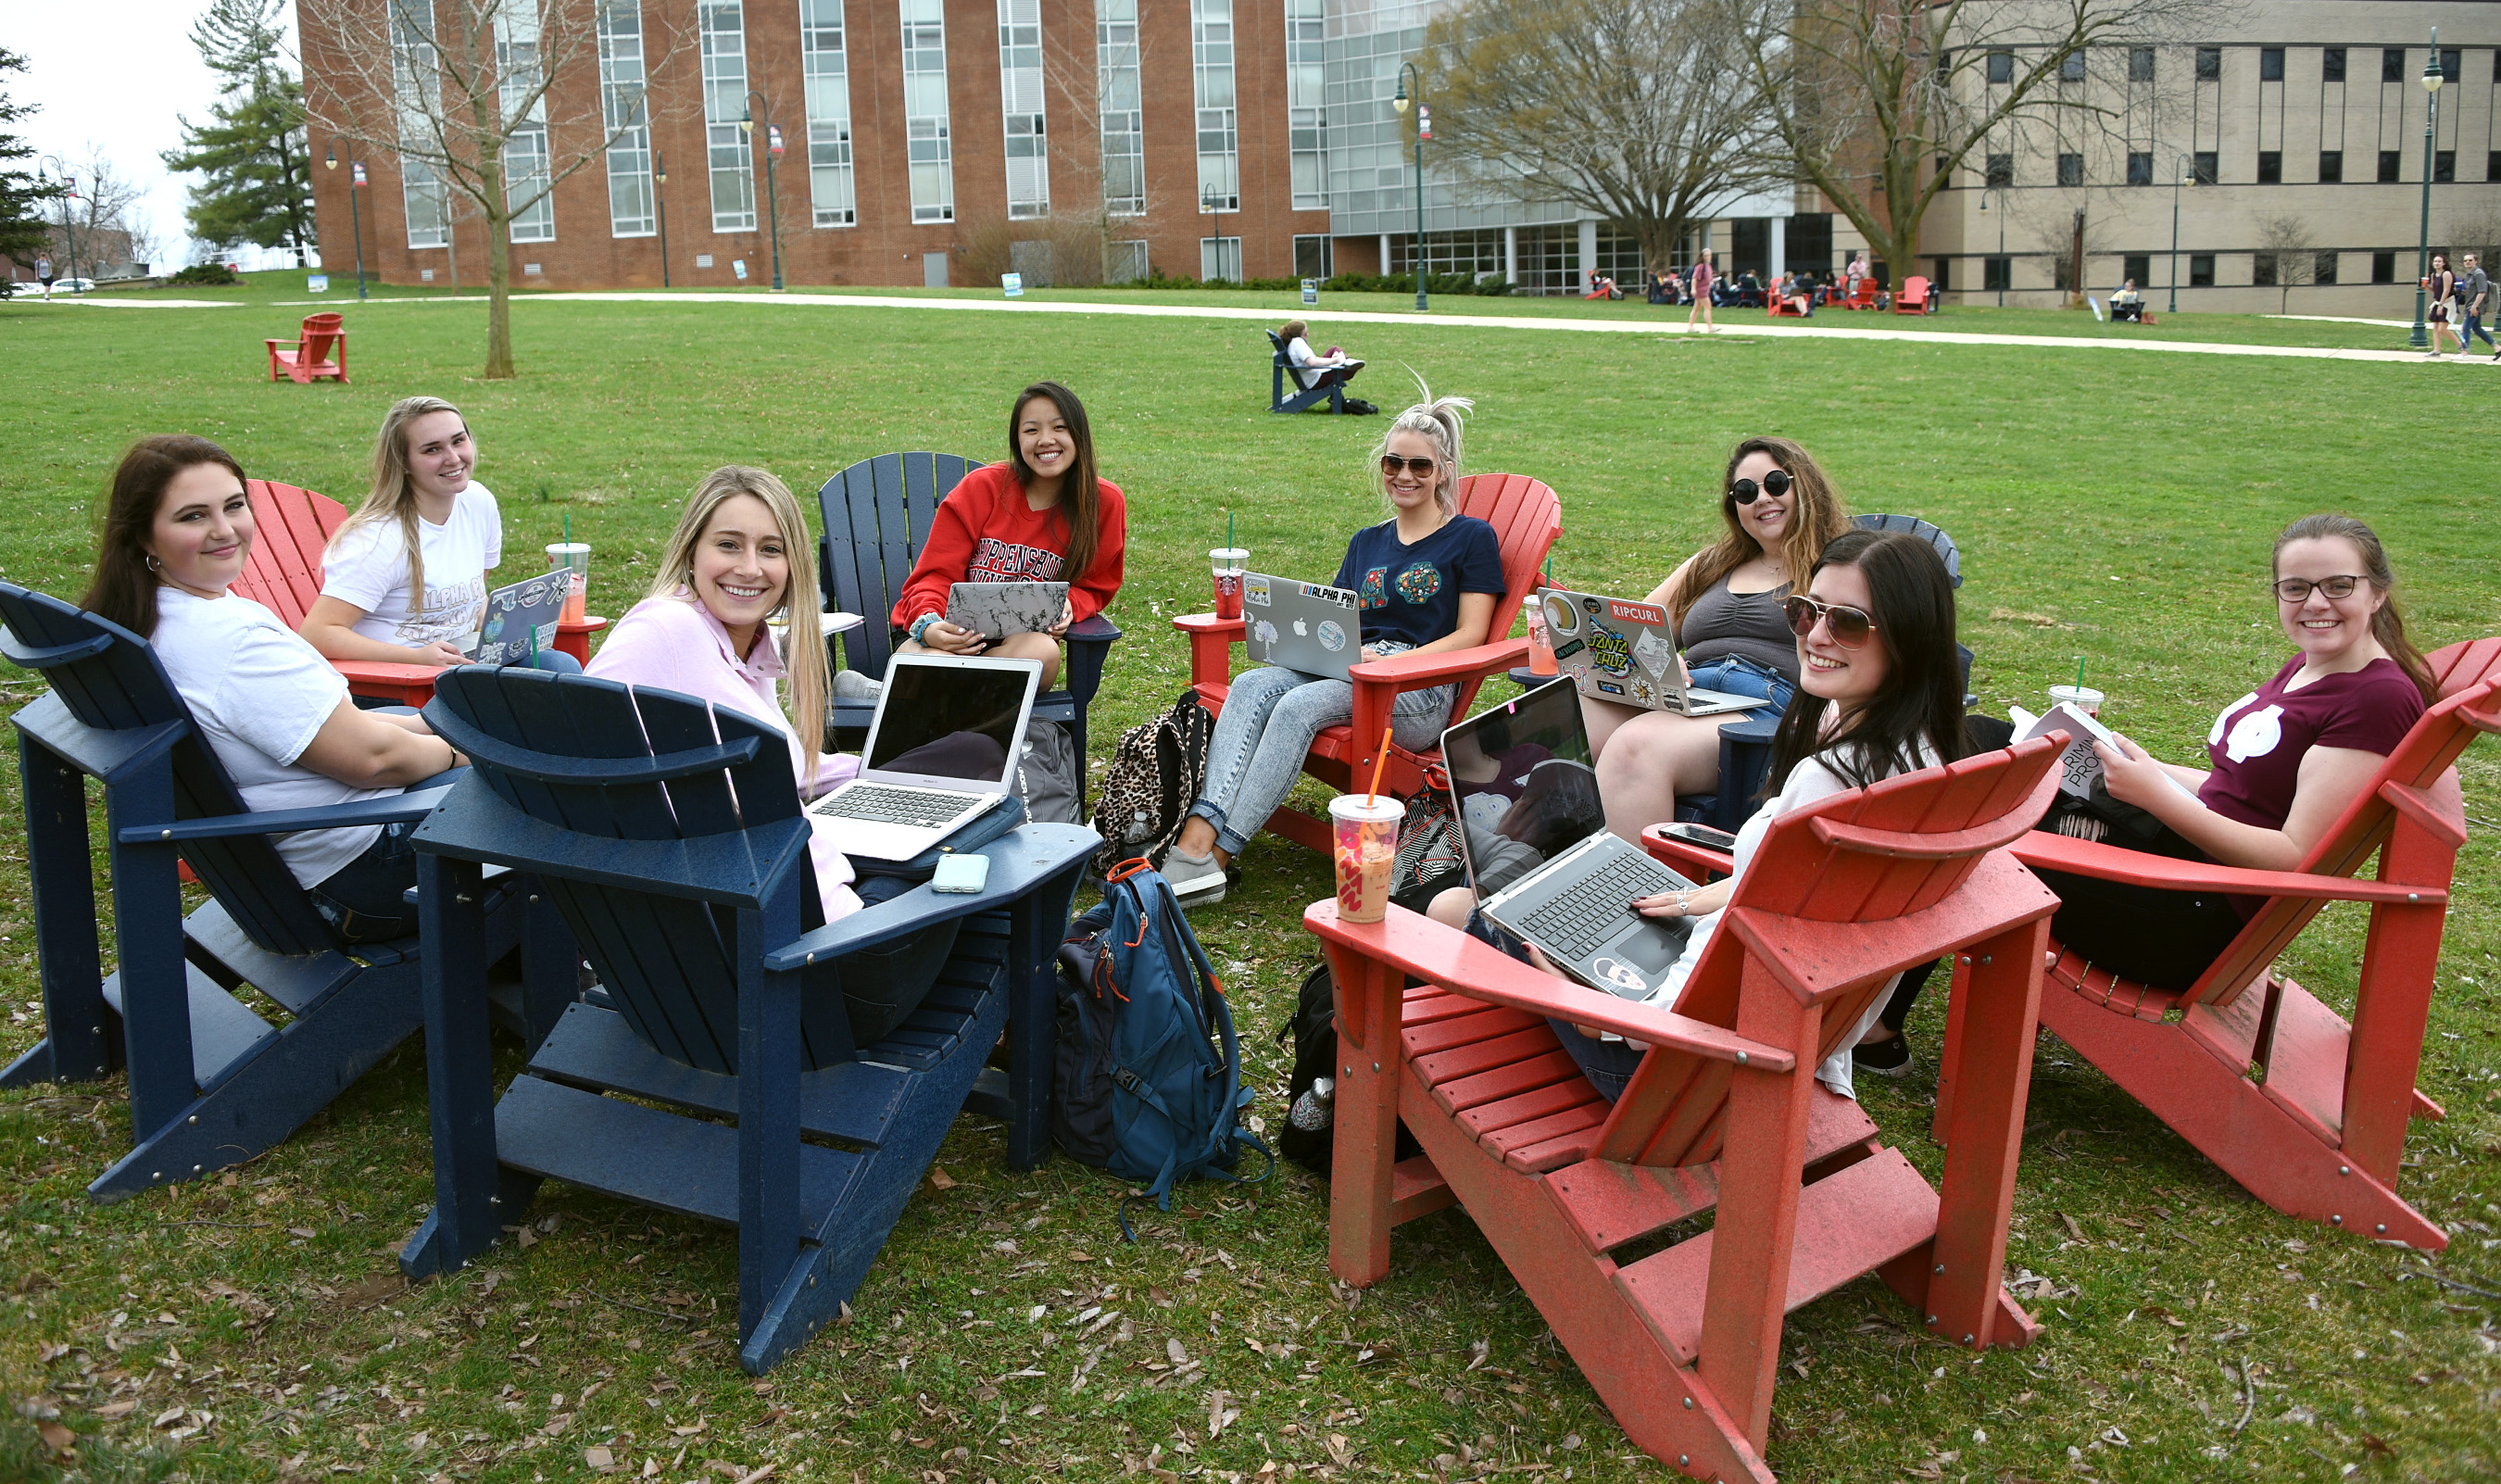 Female students studying outdoors